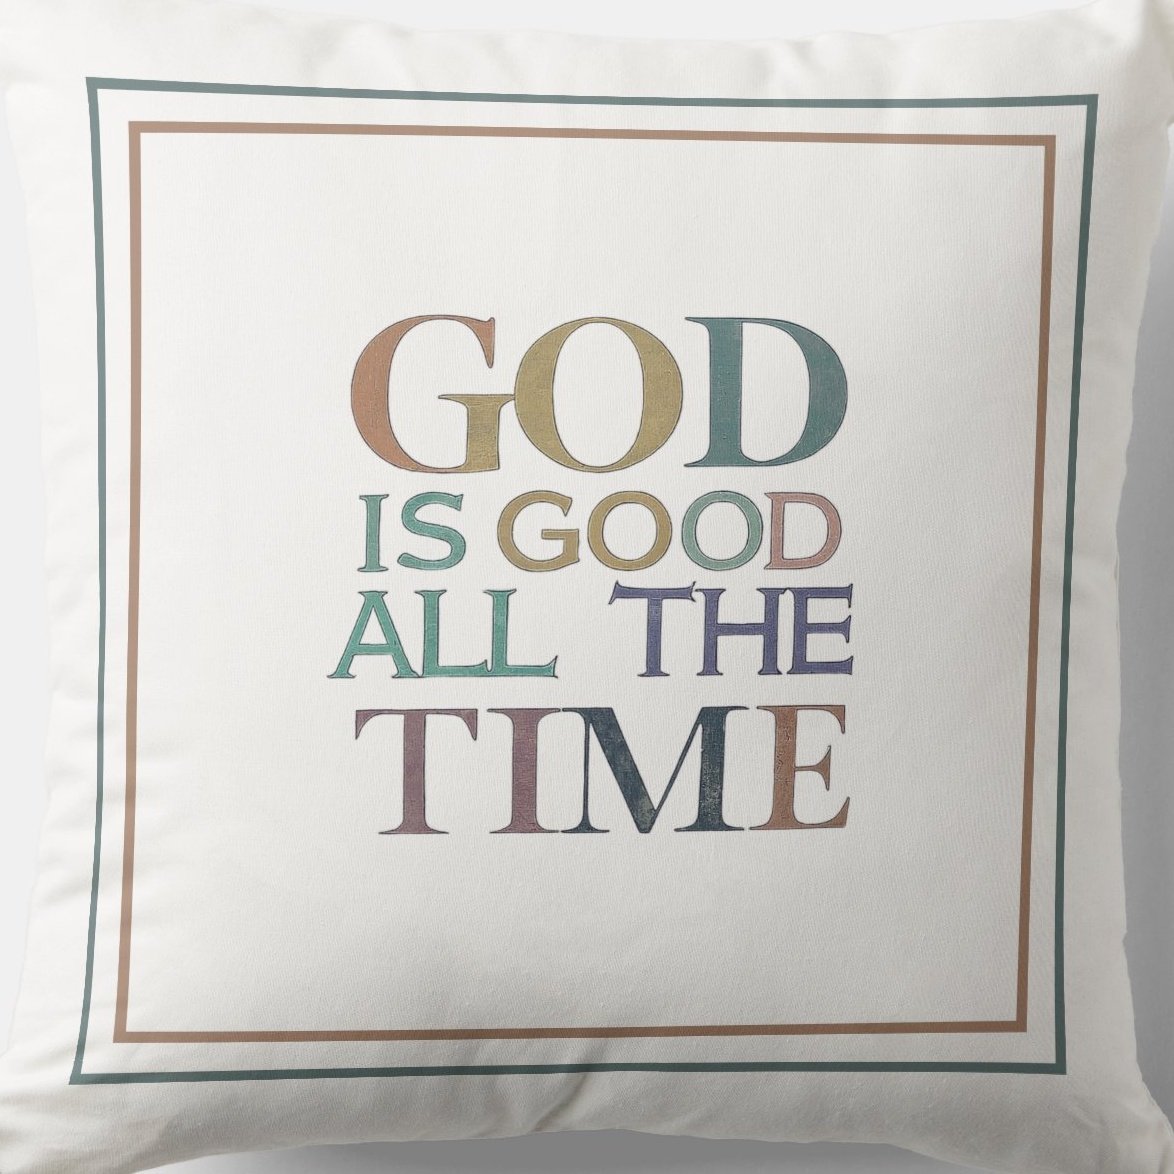 God Is Good All The Time #Cushion zazzle.com/god_is_good_al… The God's Love #Pillow #Blessing #JesusChrist #JesusSaves #Jesus #christian #spiritual #Homedecoration #uniquegift #giftideas #MothersDayGifts #giftformom #giftidea #HolySpirit #pillows #giftshop #giftsforher #giftsformom